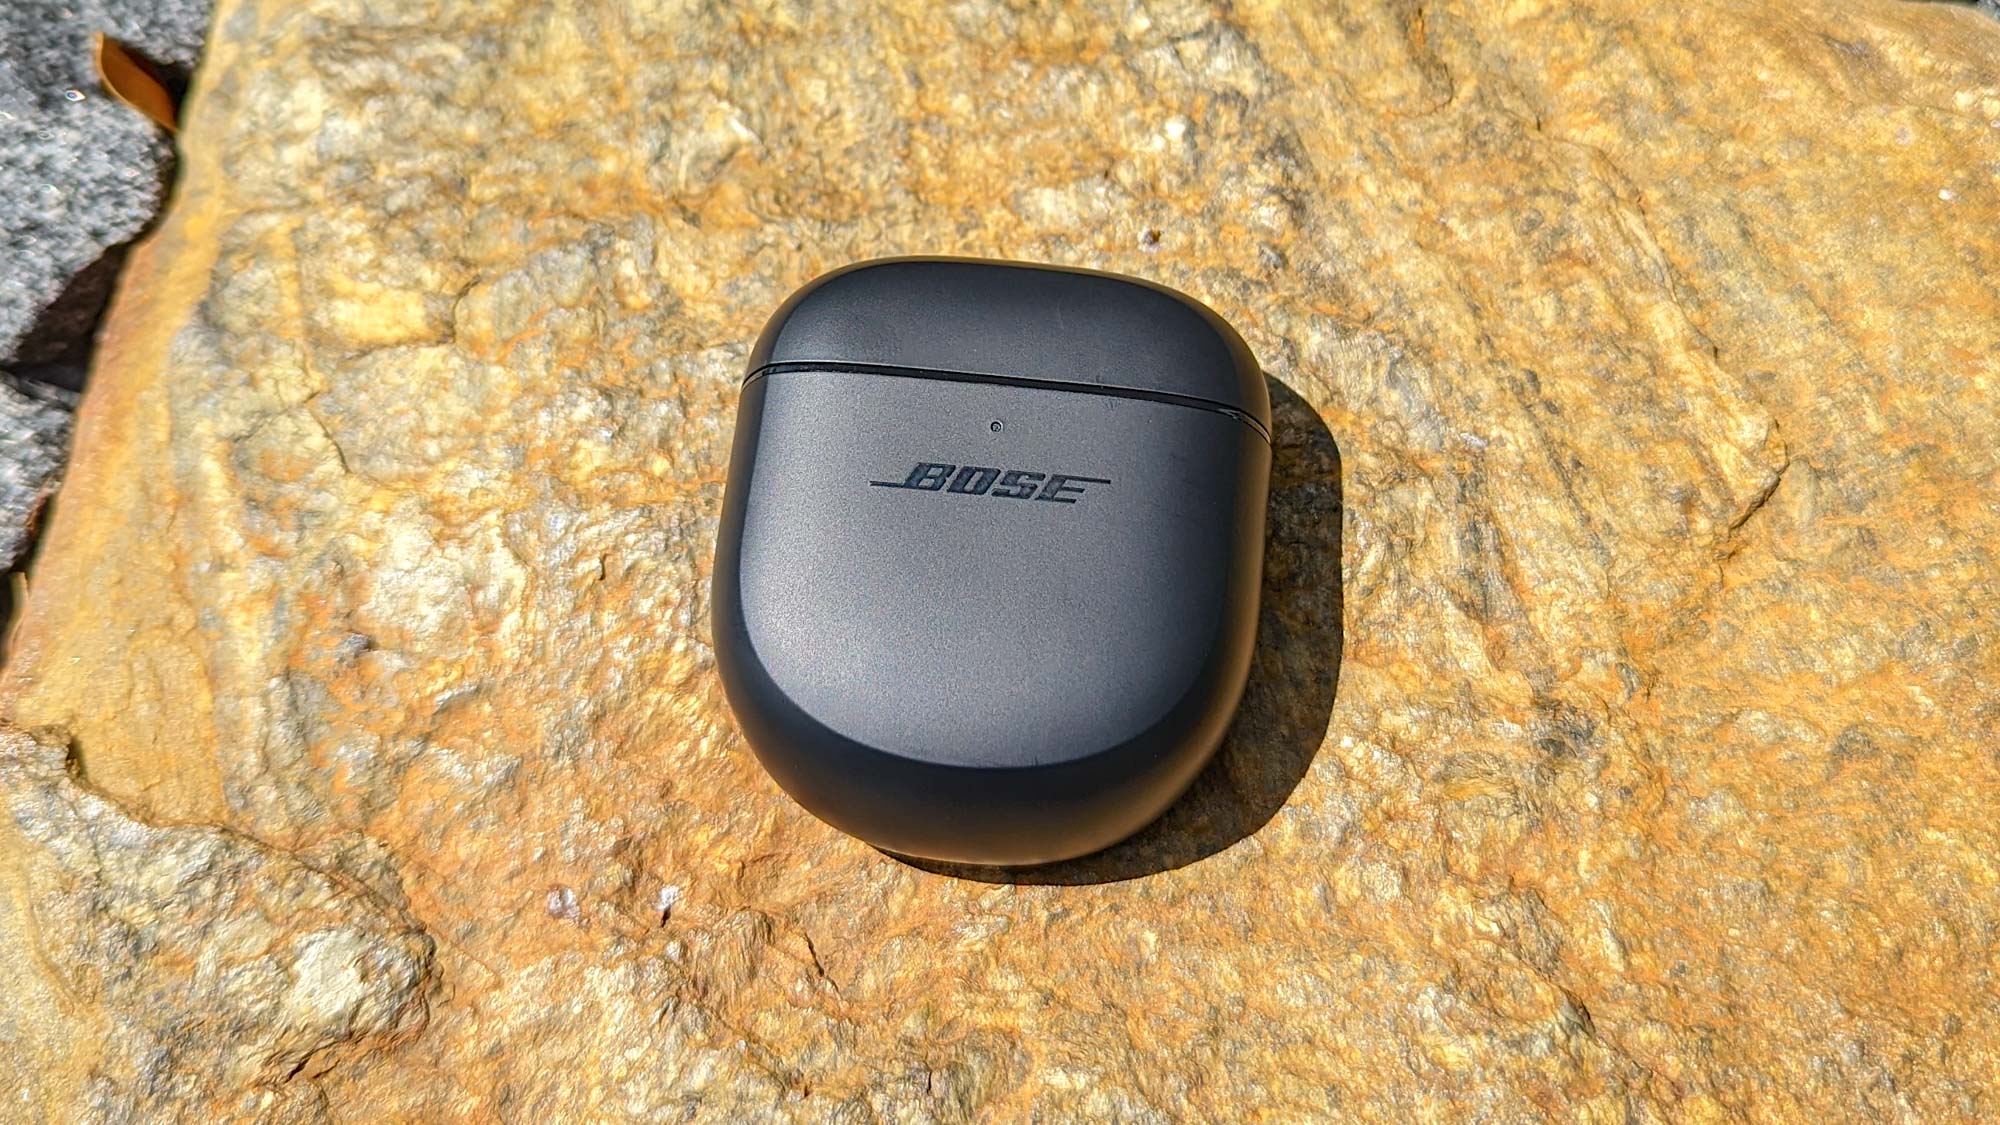 Bose QuietComfort Earbuds 2 charging case, in black on a stone surface